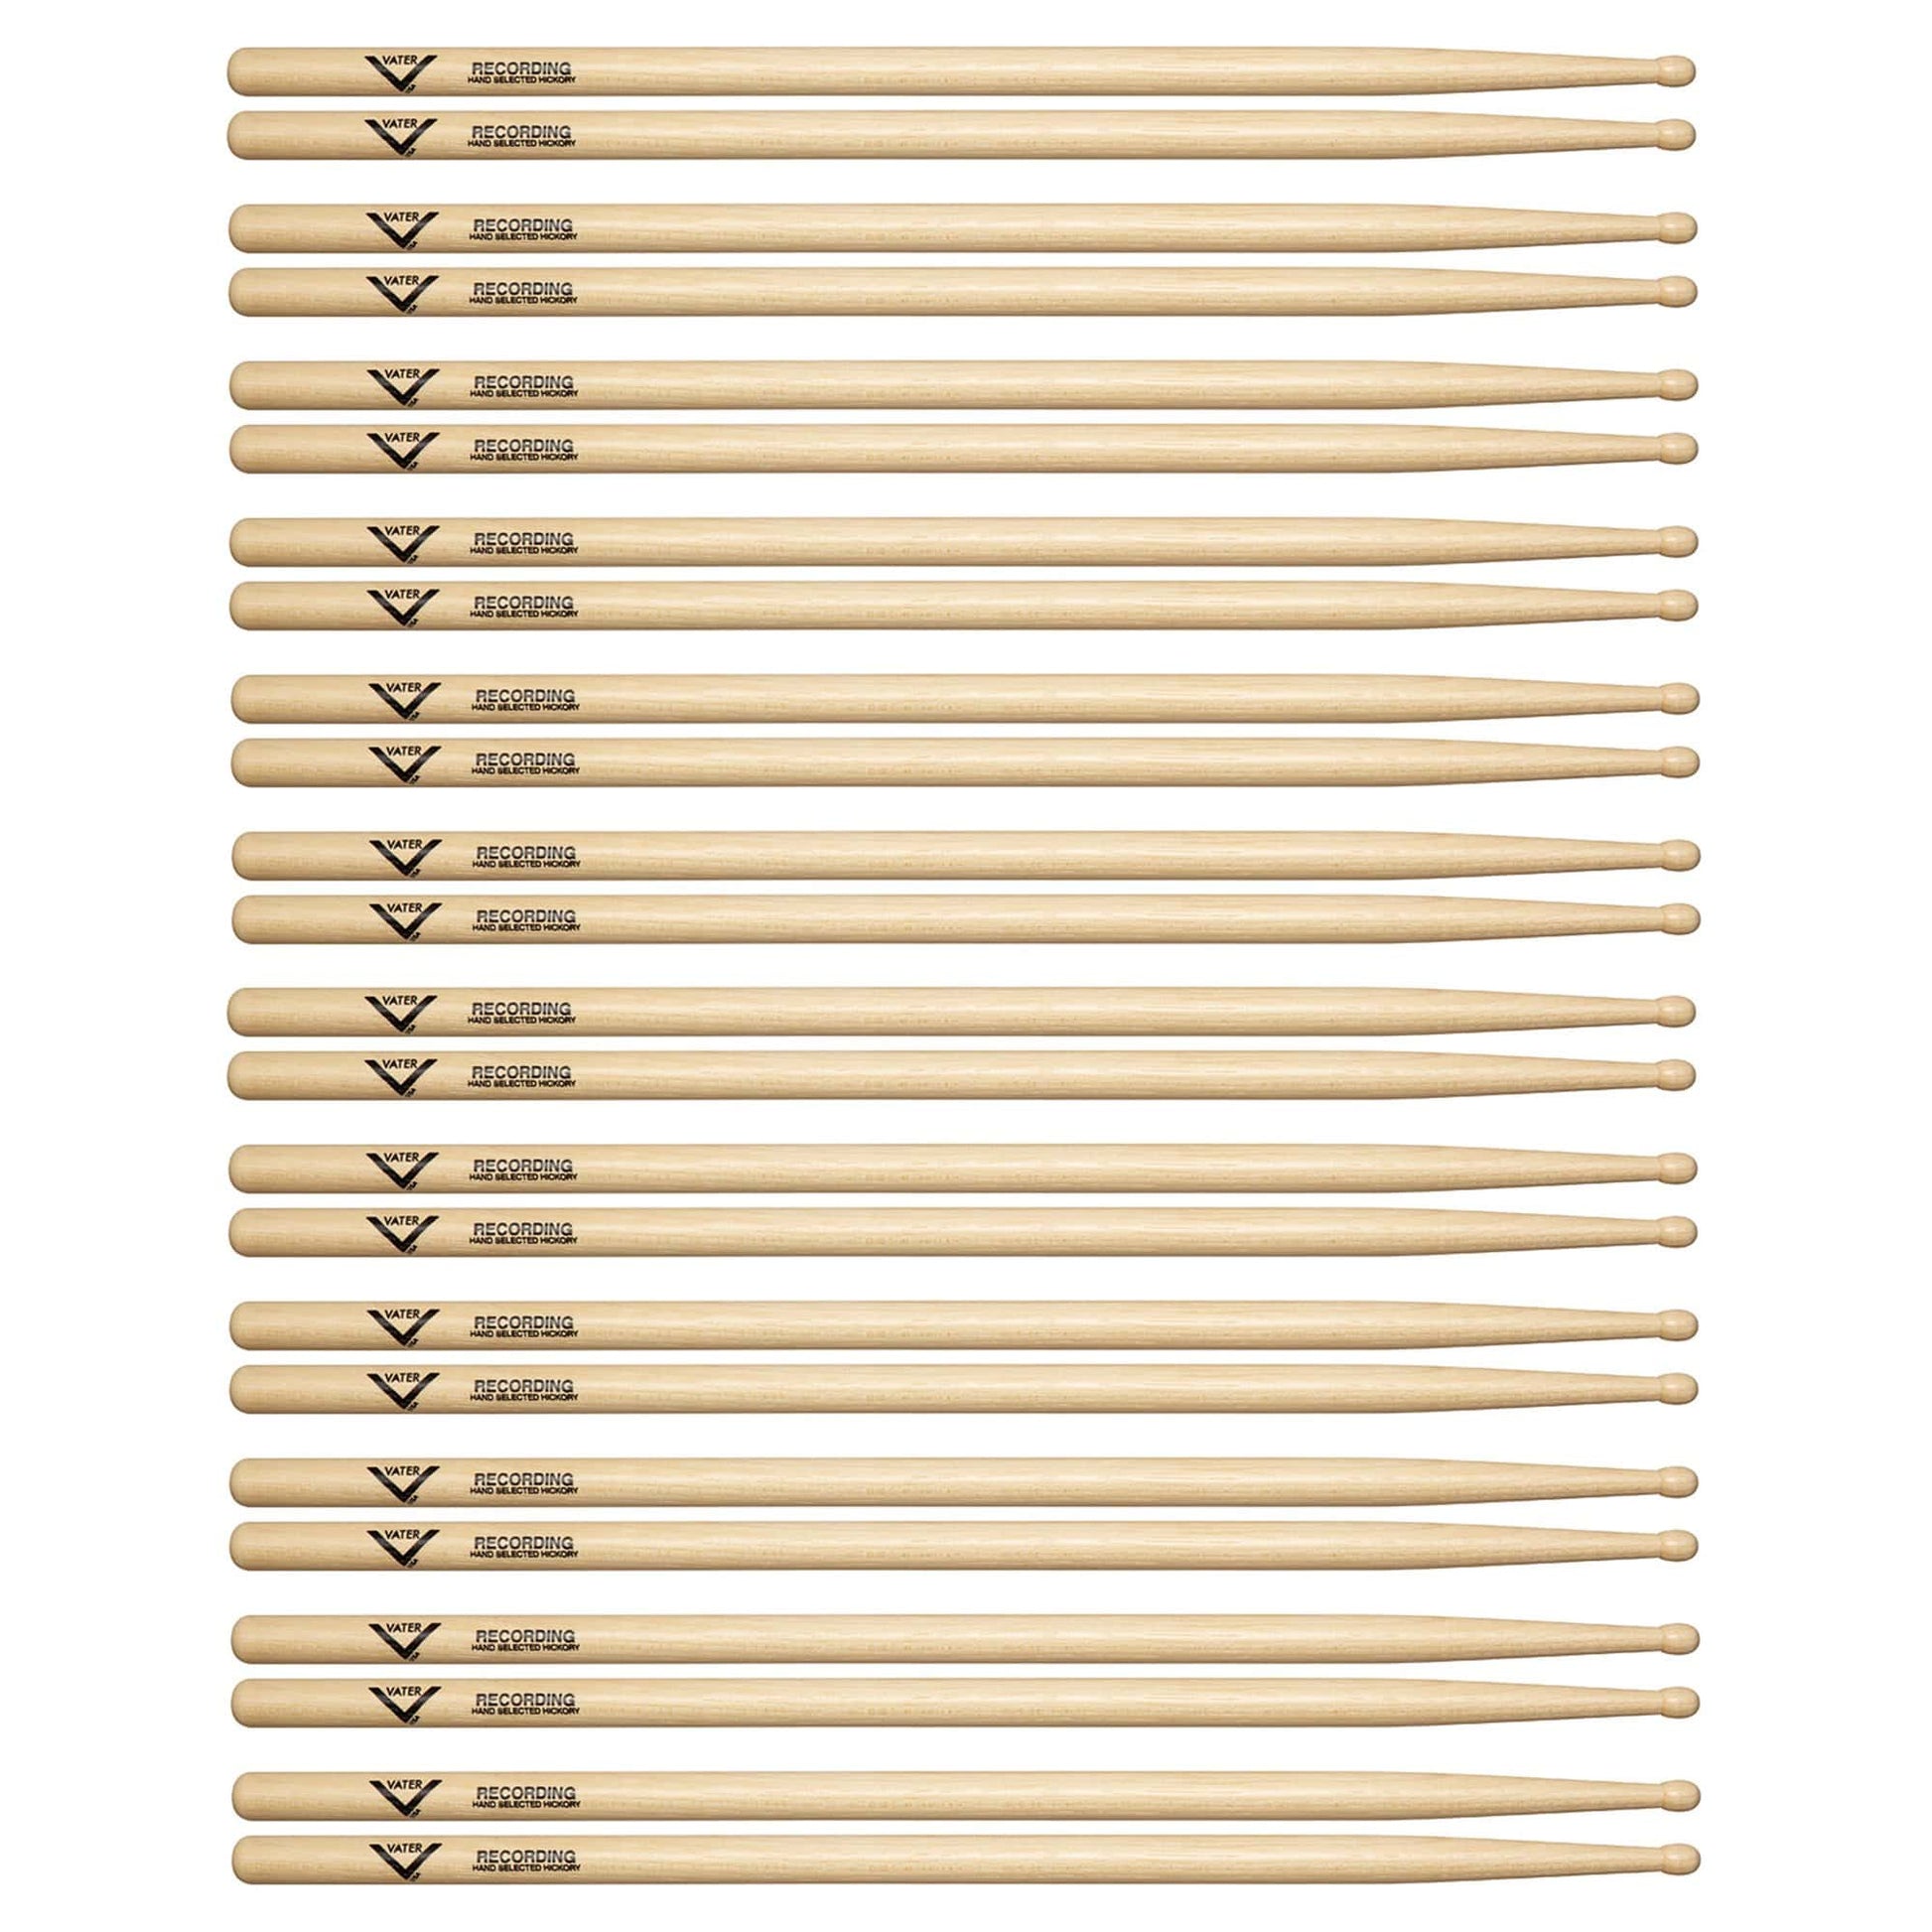 Vater Hickory Recording Wood Tip Drum Sticks (12 Pair Bundle) Drums and Percussion / Parts and Accessories / Drum Sticks and Mallets